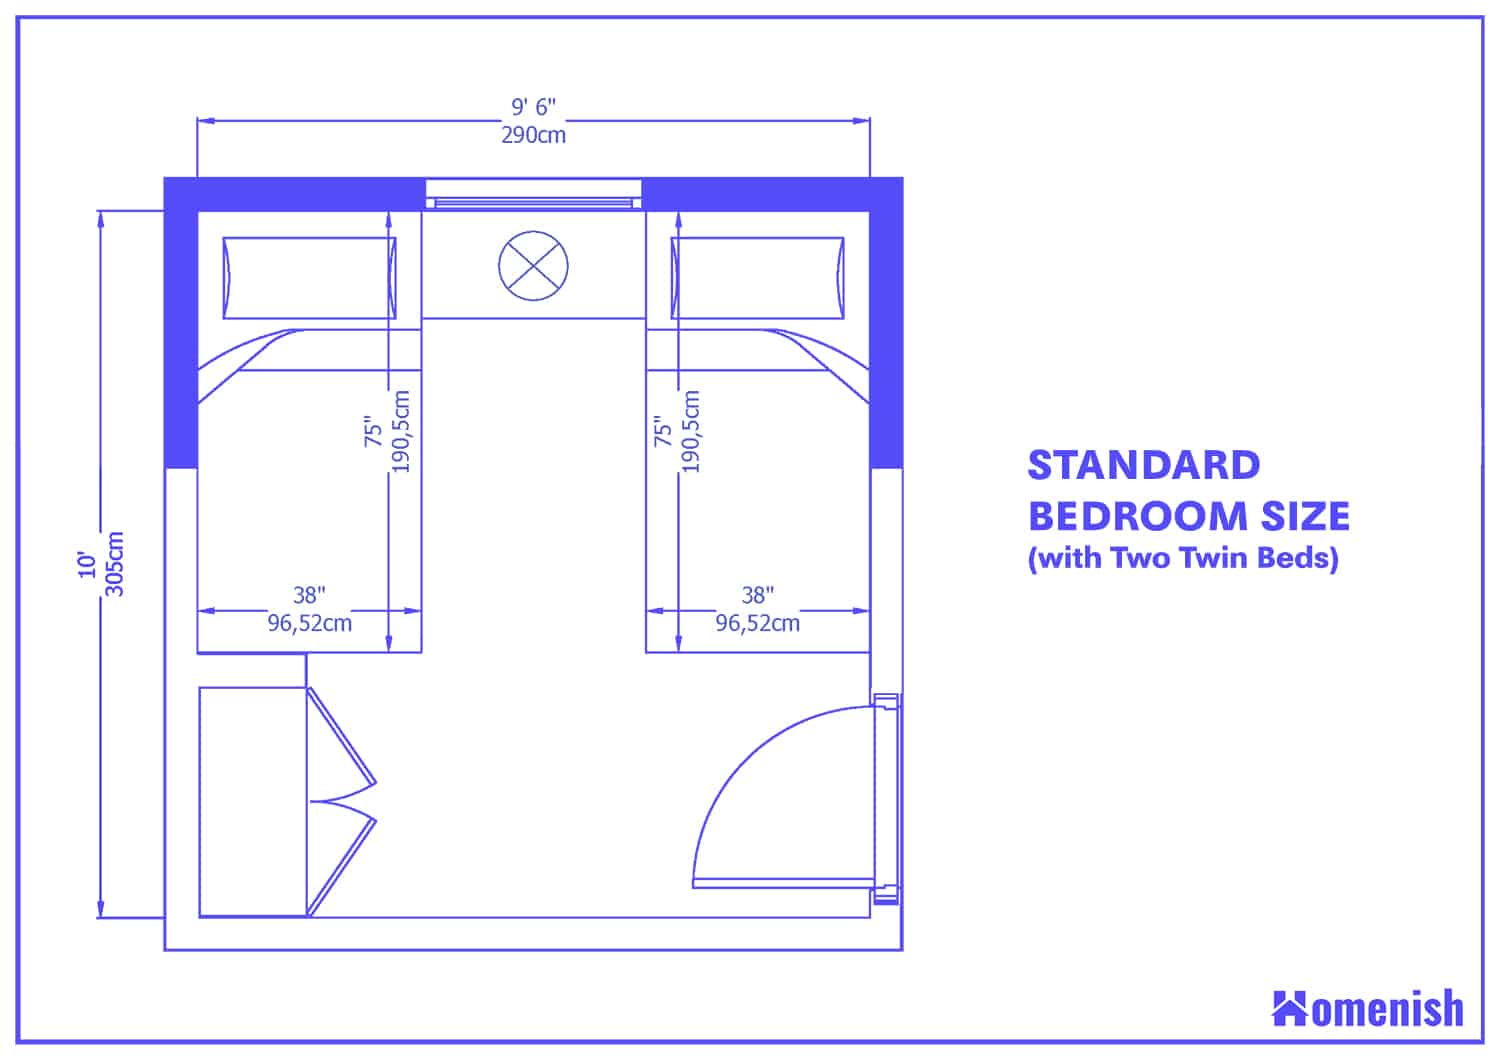 Standard Bedroom-Size with Two Twin Beds